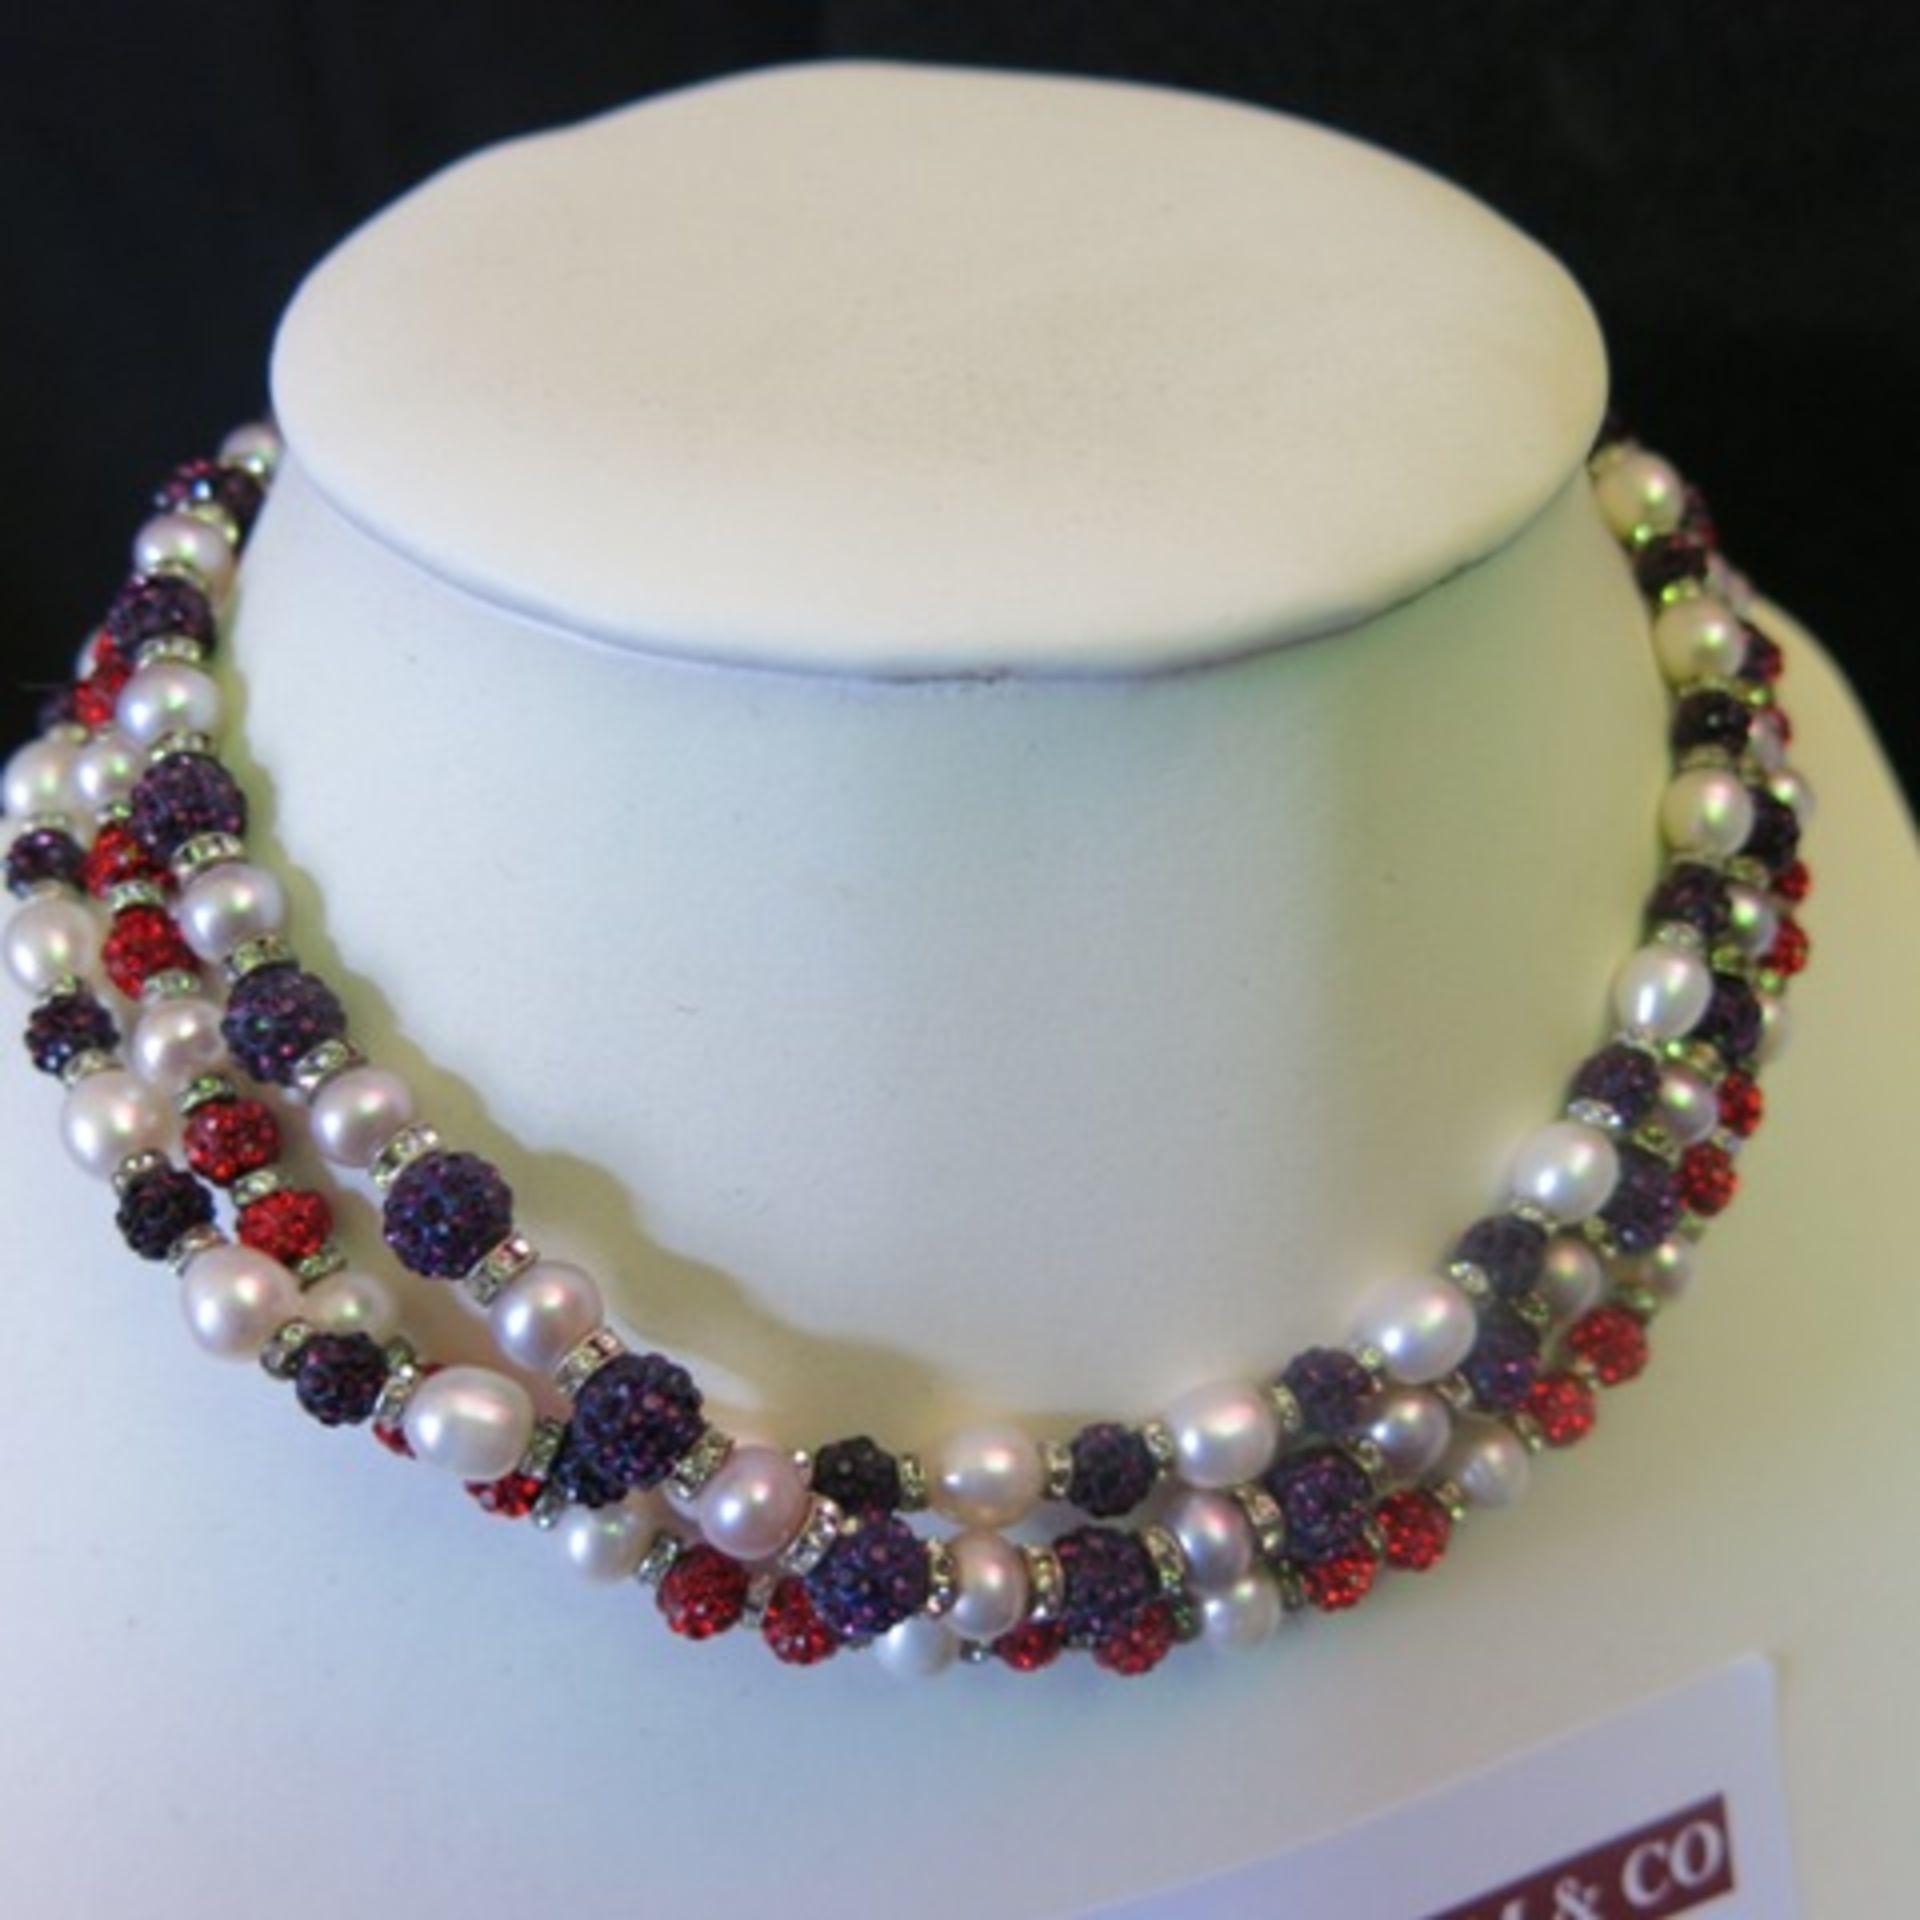 6 x Mixed Pearl & Coloured Stone Necklace with CZ/Clear Stone Separators. Total RRP £768.00 - Image 2 of 5